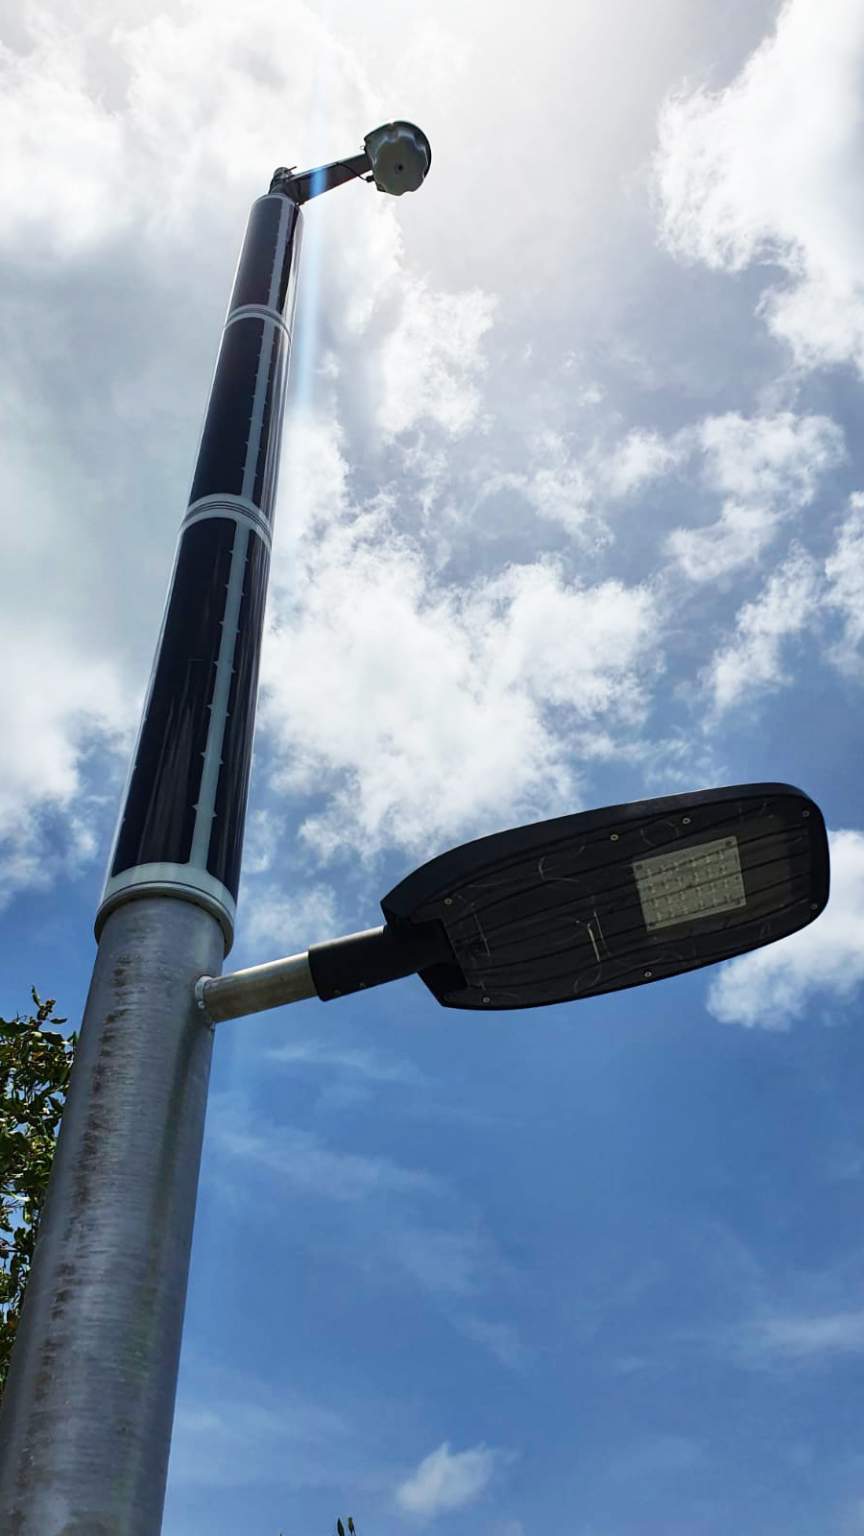 Solar marine lighting and WiFi in one pole